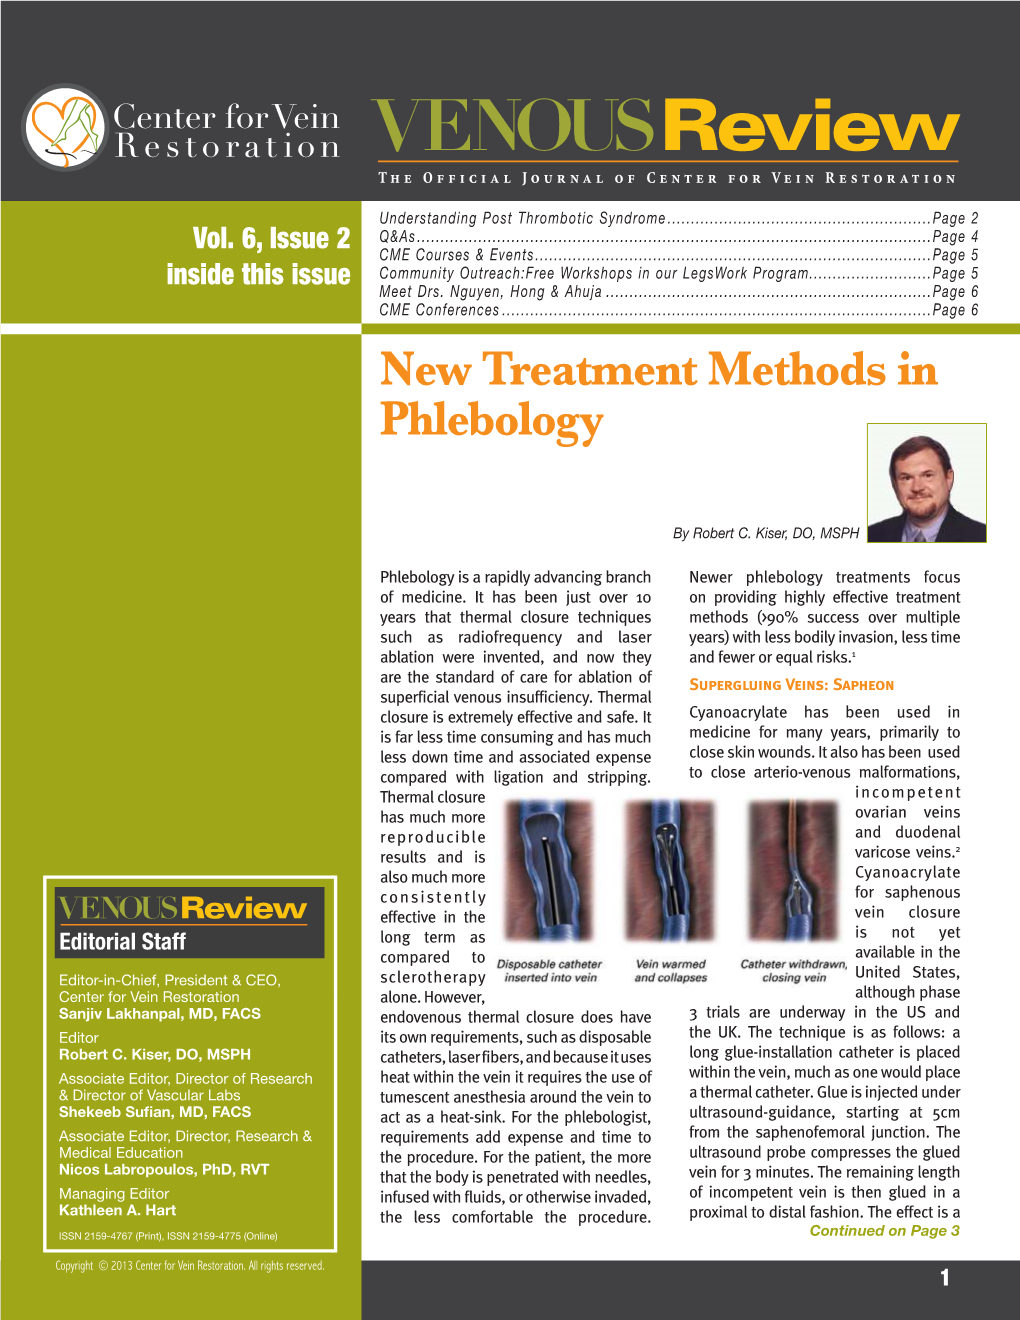 New Treatment Methods in Phlebology